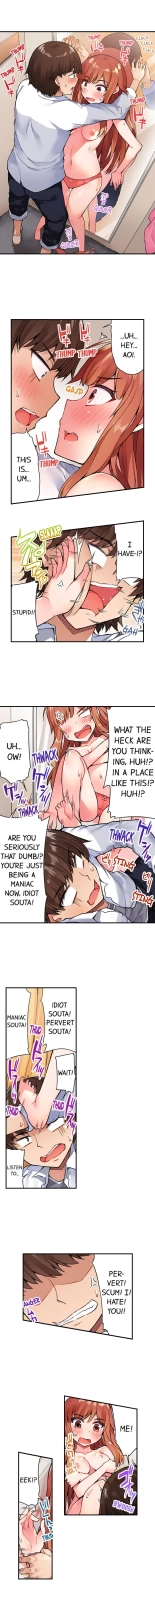 Traditional Job of Washing Girls' Body Ch. 1-189 : page 212